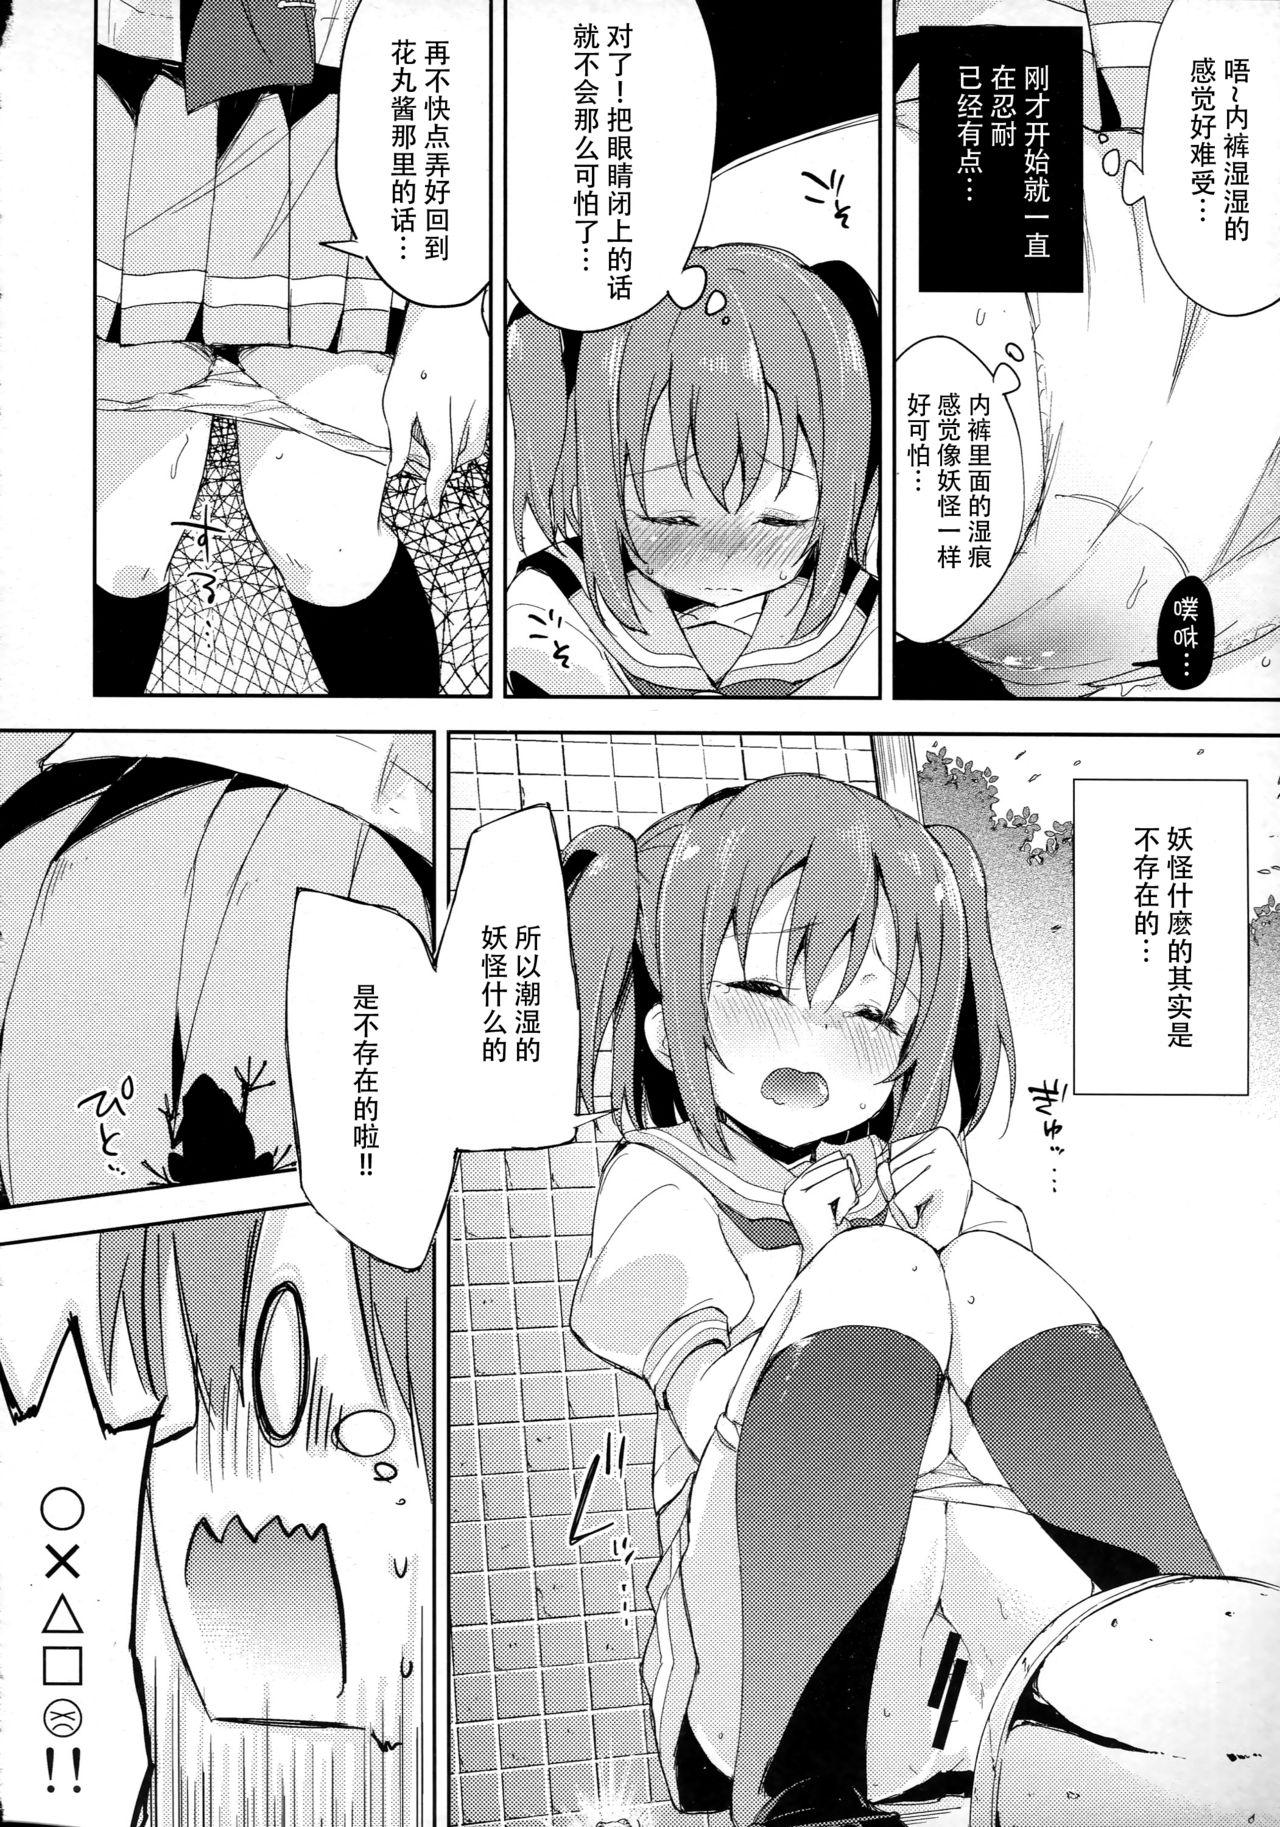 Officesex Yotogi-Zoushi - Love live sunshine Leite - Page 12